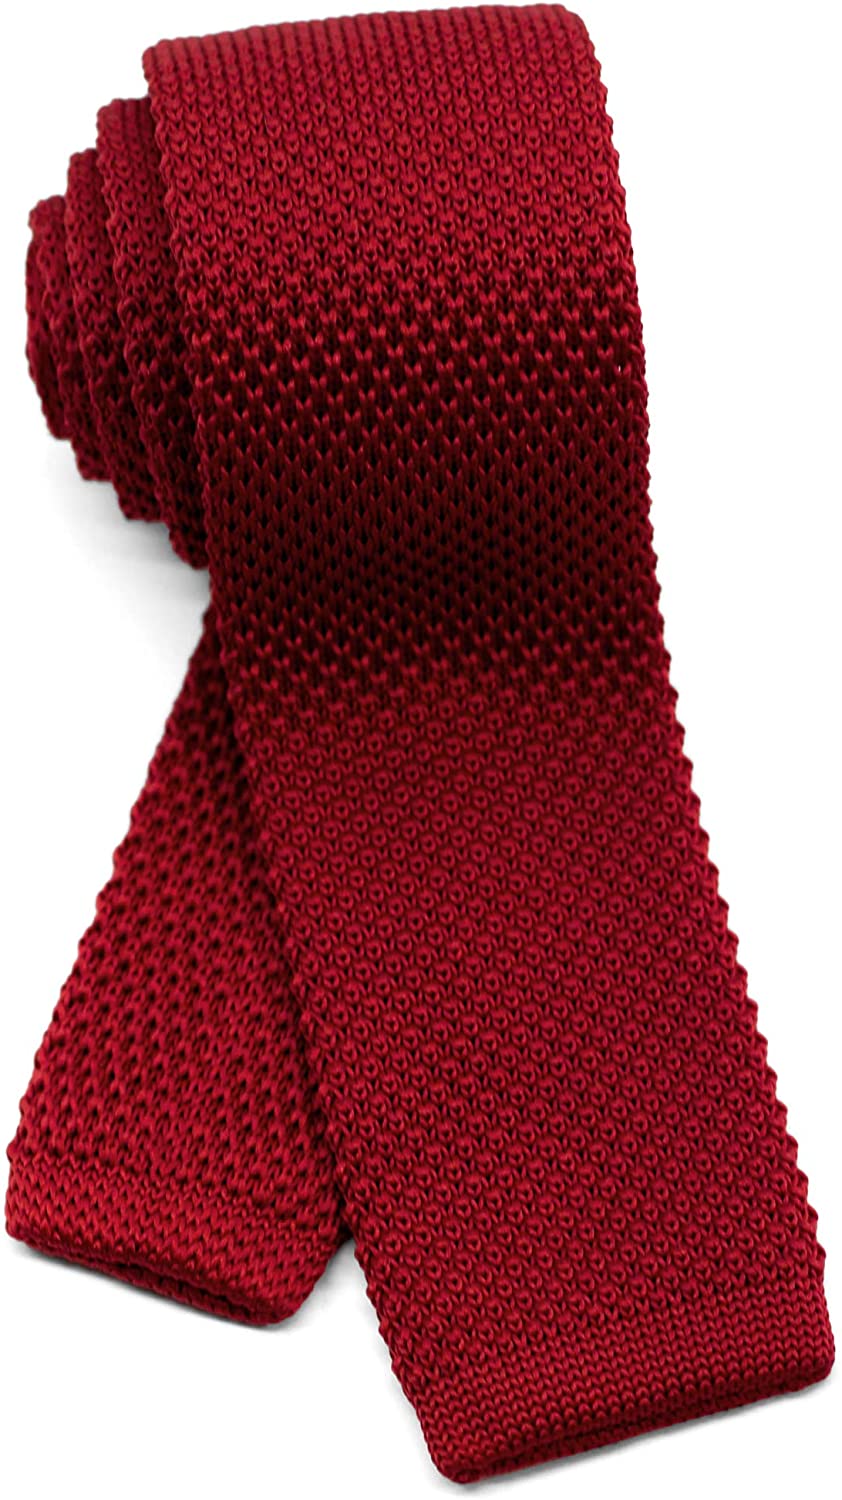 WANDM Men's Knit Tie Slim Skinny Square Necktie Width 2.2 inches Washable Solid Color and Gift Box 